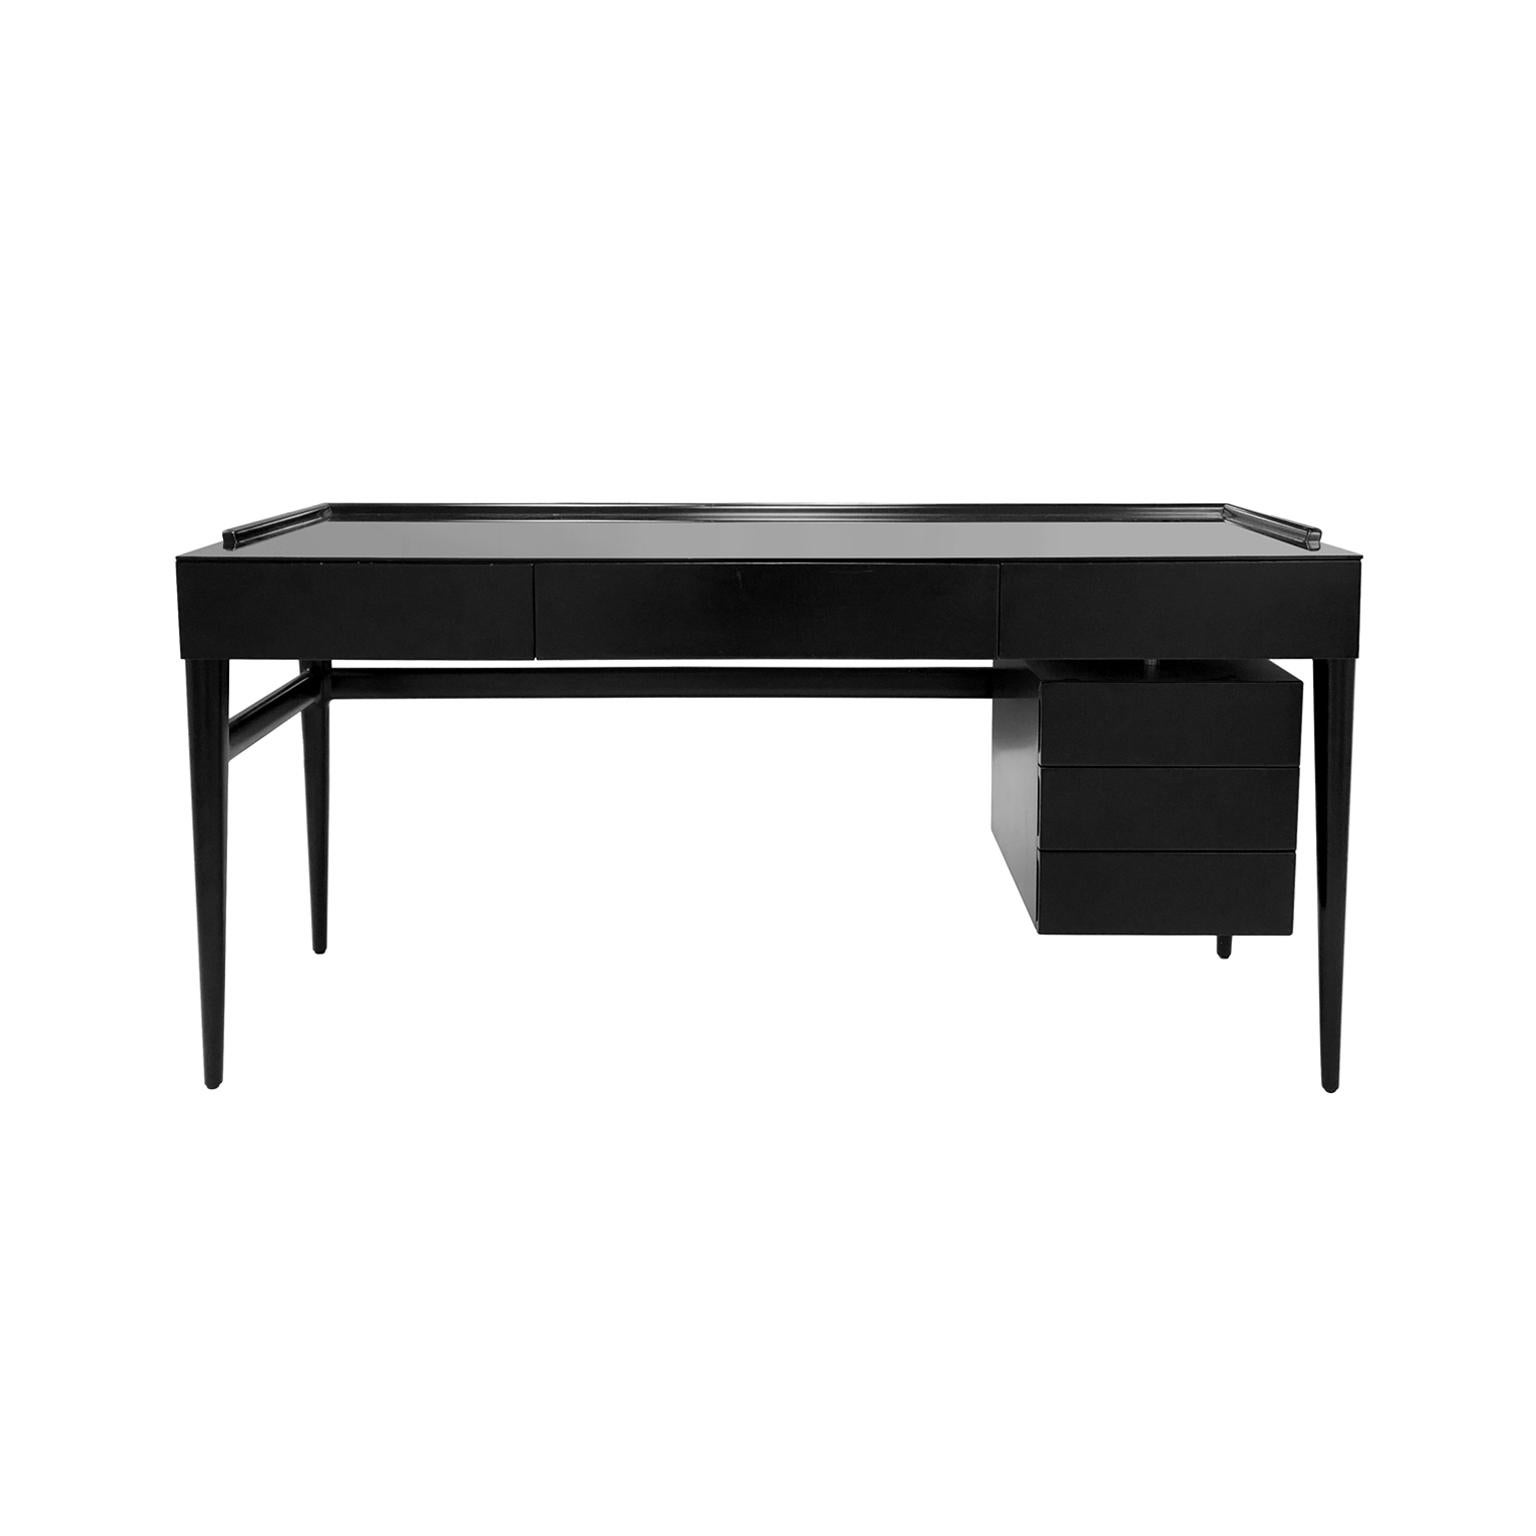 Midcentury ebonized wood desk with drawers and glass top in the manner of Gio Ponti. Italy, 1950s.